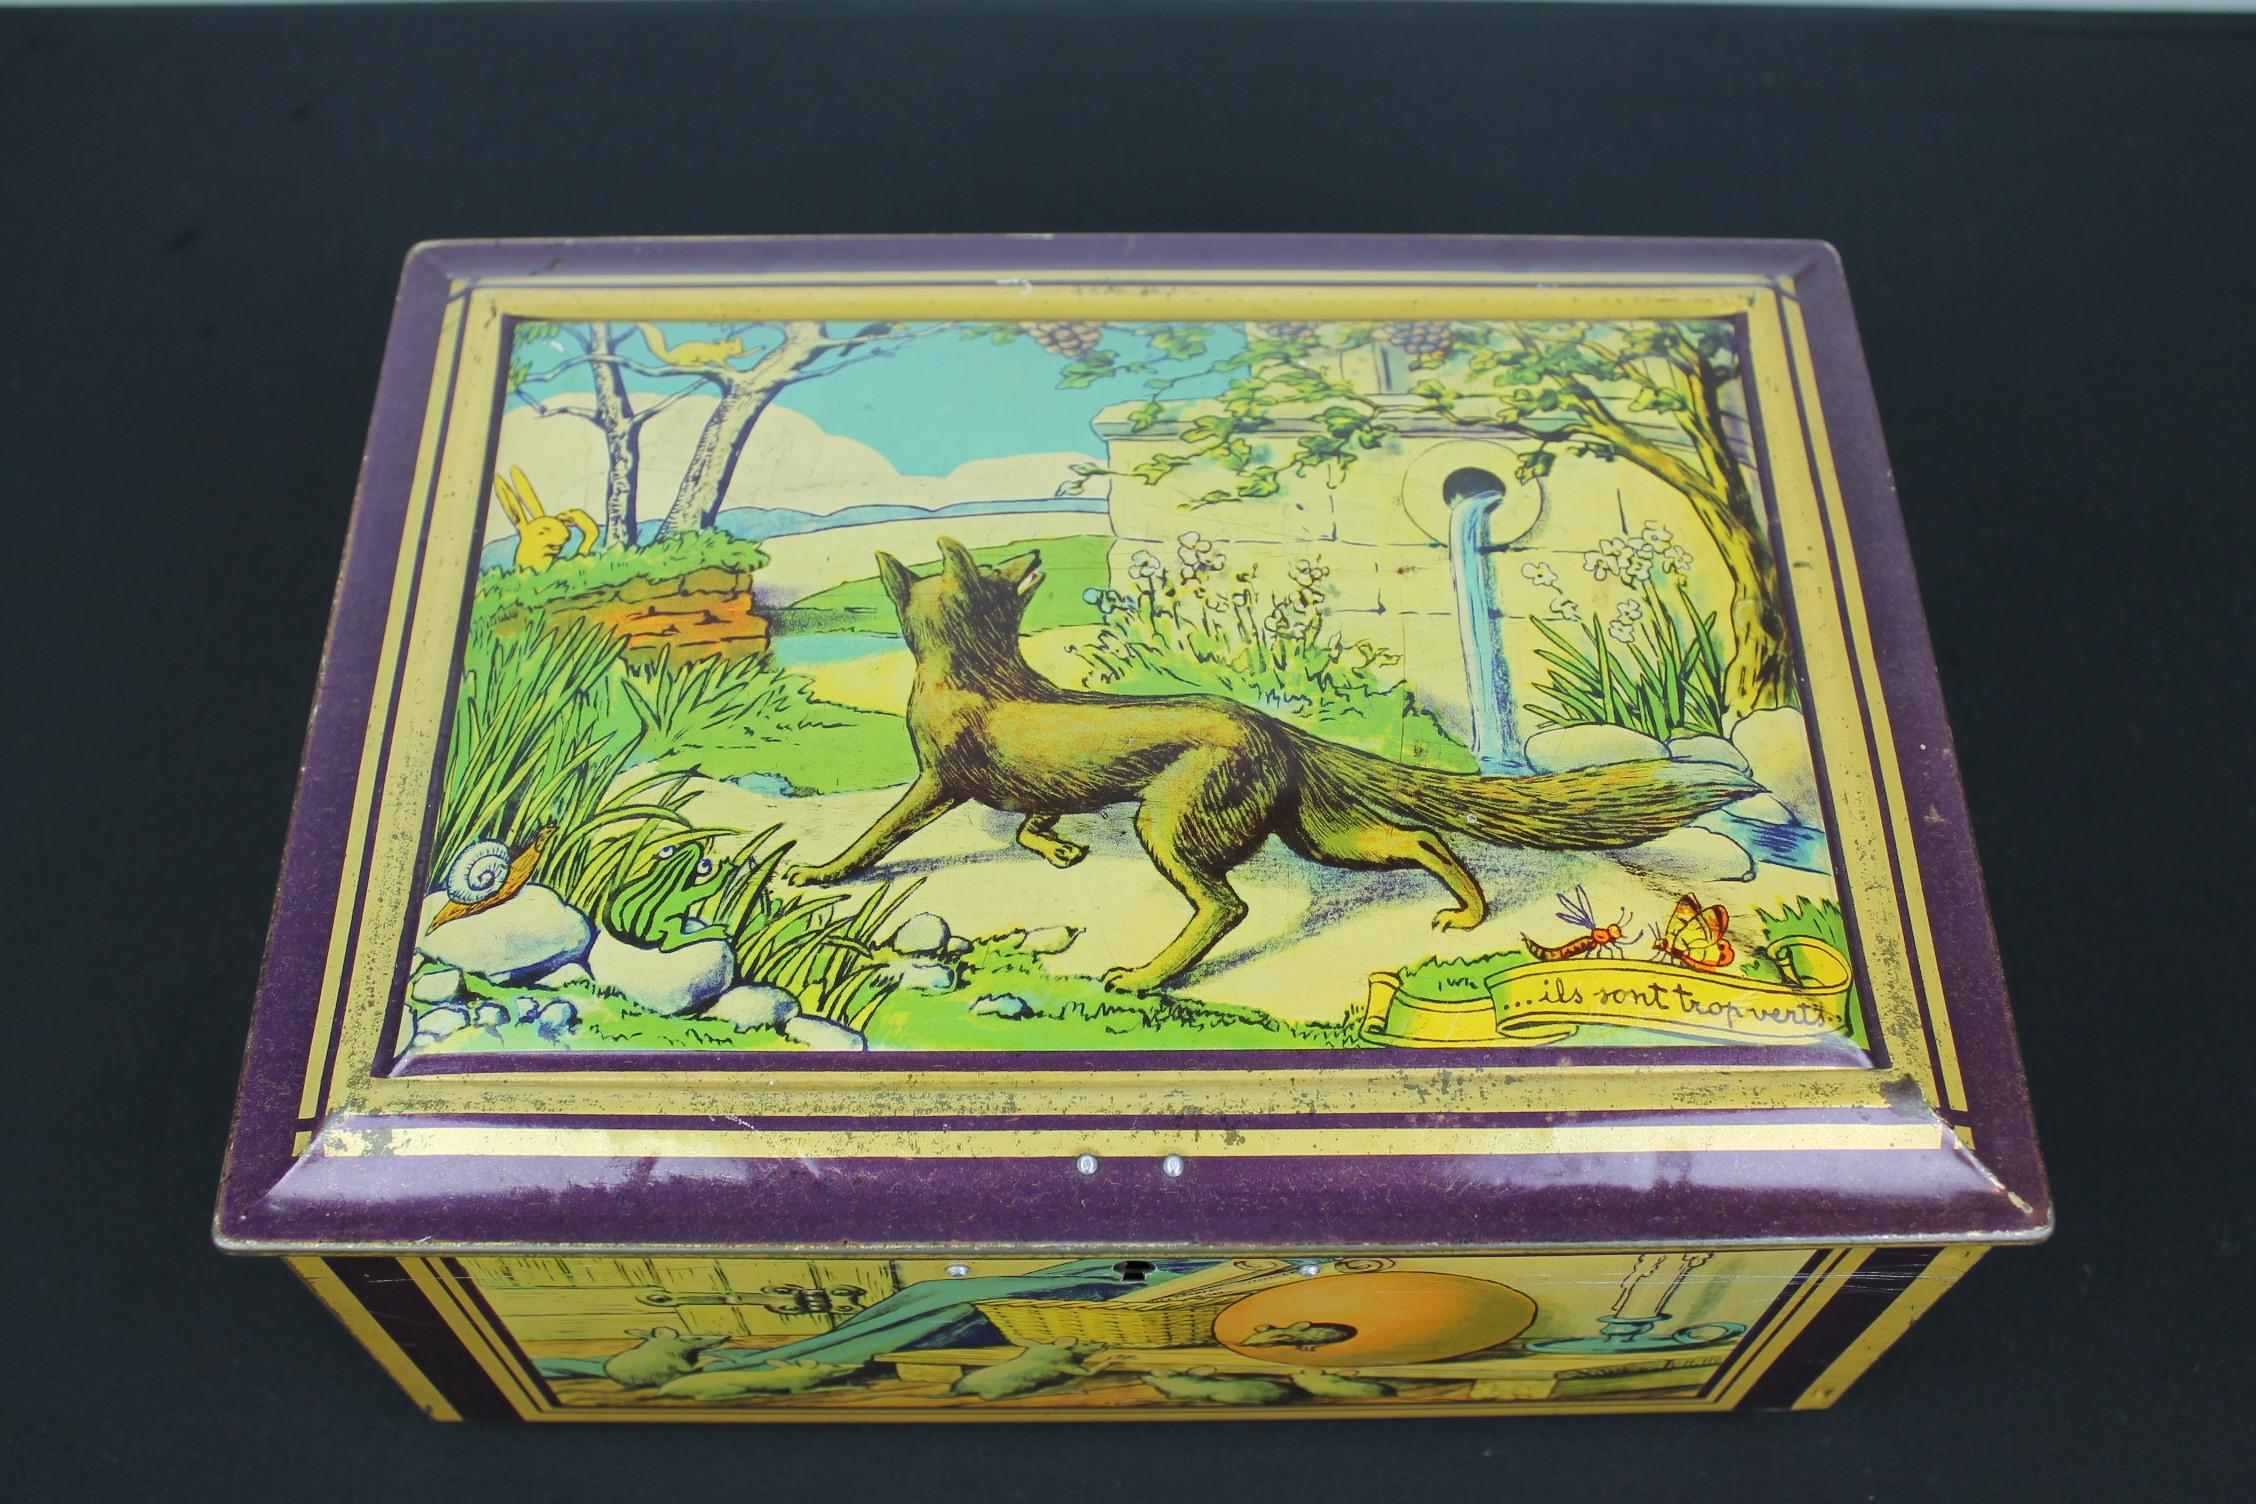 Antique tin with lots of animals by De Wulf Brussels. 
This Belgian storage tin dates circa 1940s and has a great design of nature landscapes with many animals like wolf, frog, hare, butterfly, dragonfly, snail, mice, sheep, fox, ants, snake, crow,